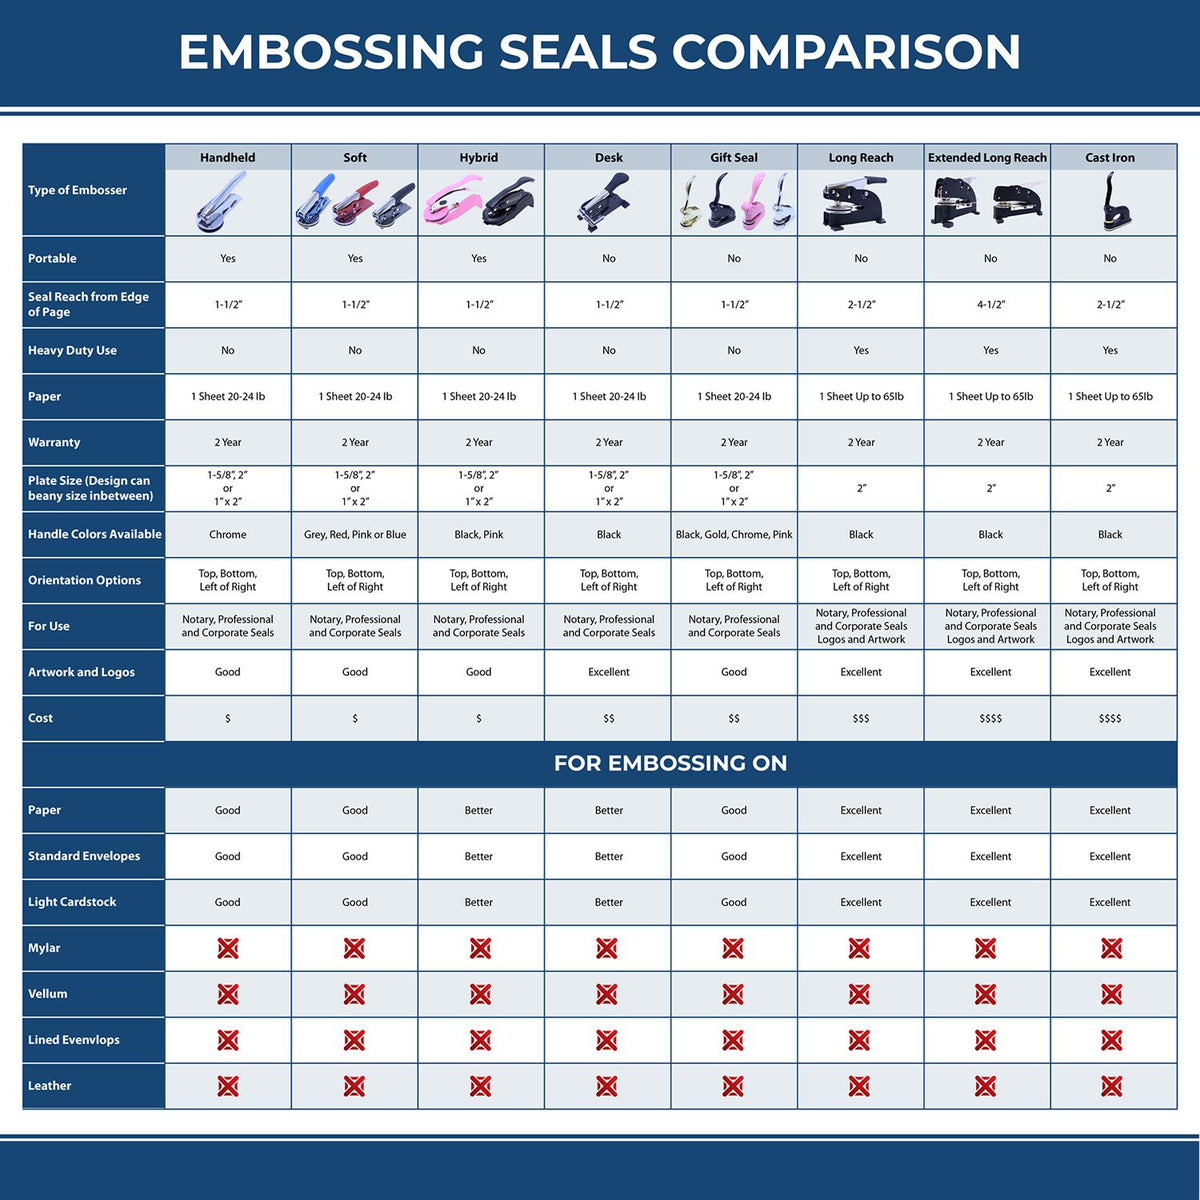 A comparison chart for the different types of mount models available for the State of Maine Soft Land Surveyor Embossing Seal.